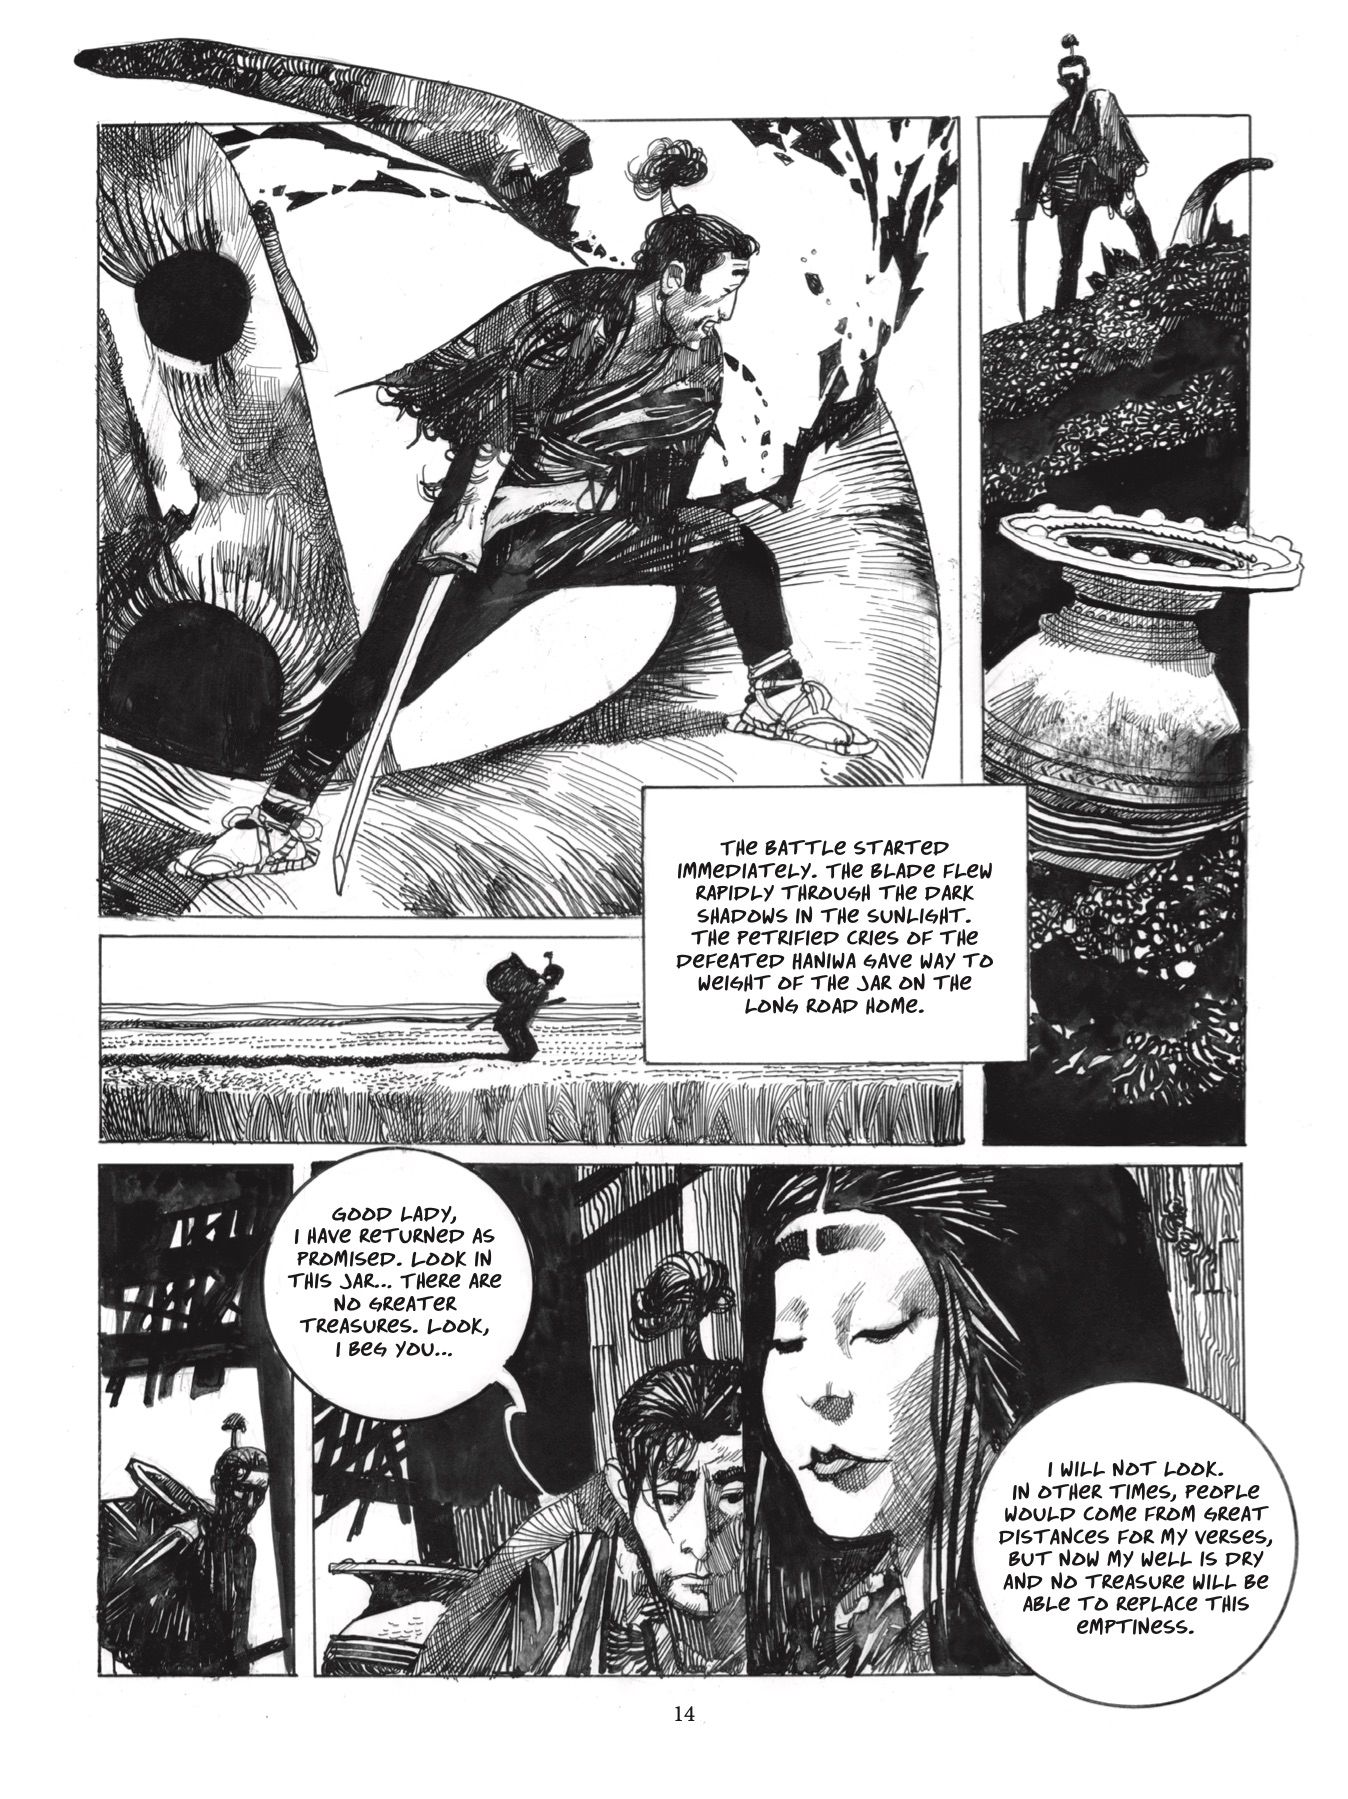 EXCLUSIVE PREVIEW: The Collected Toppi Vol. 6 HC